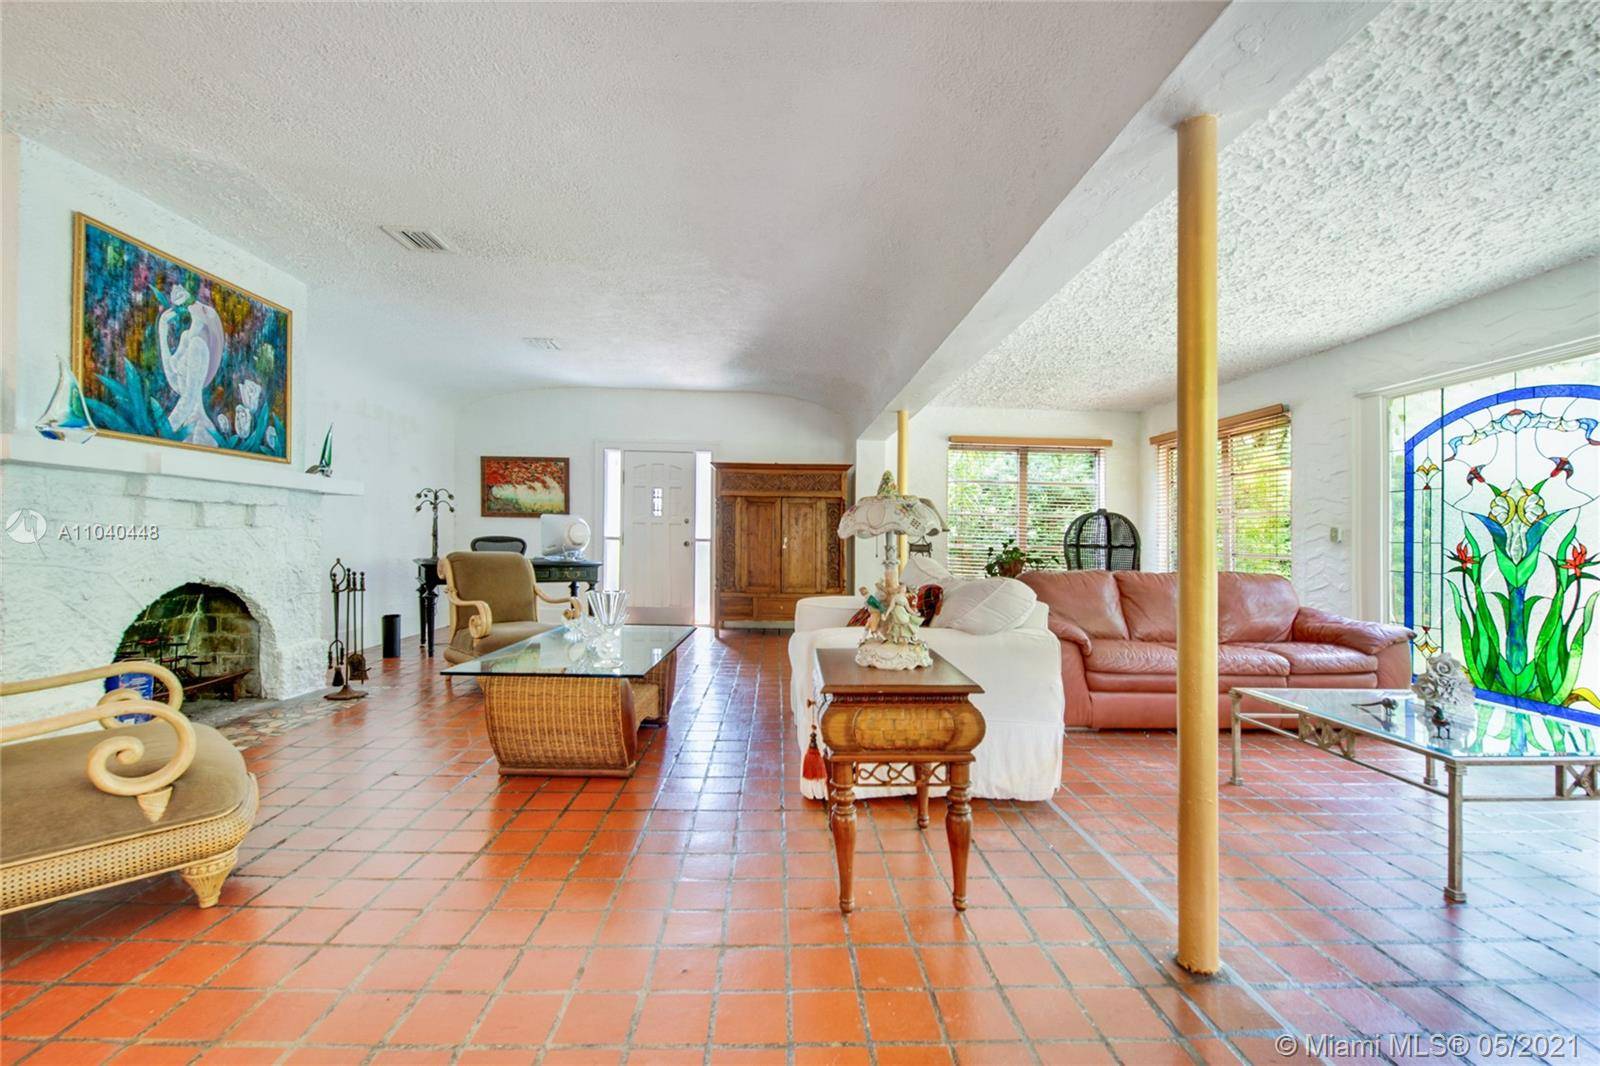 Embrace the charming lifestyle of Coral Gables with this Old Spanish historic designated home.